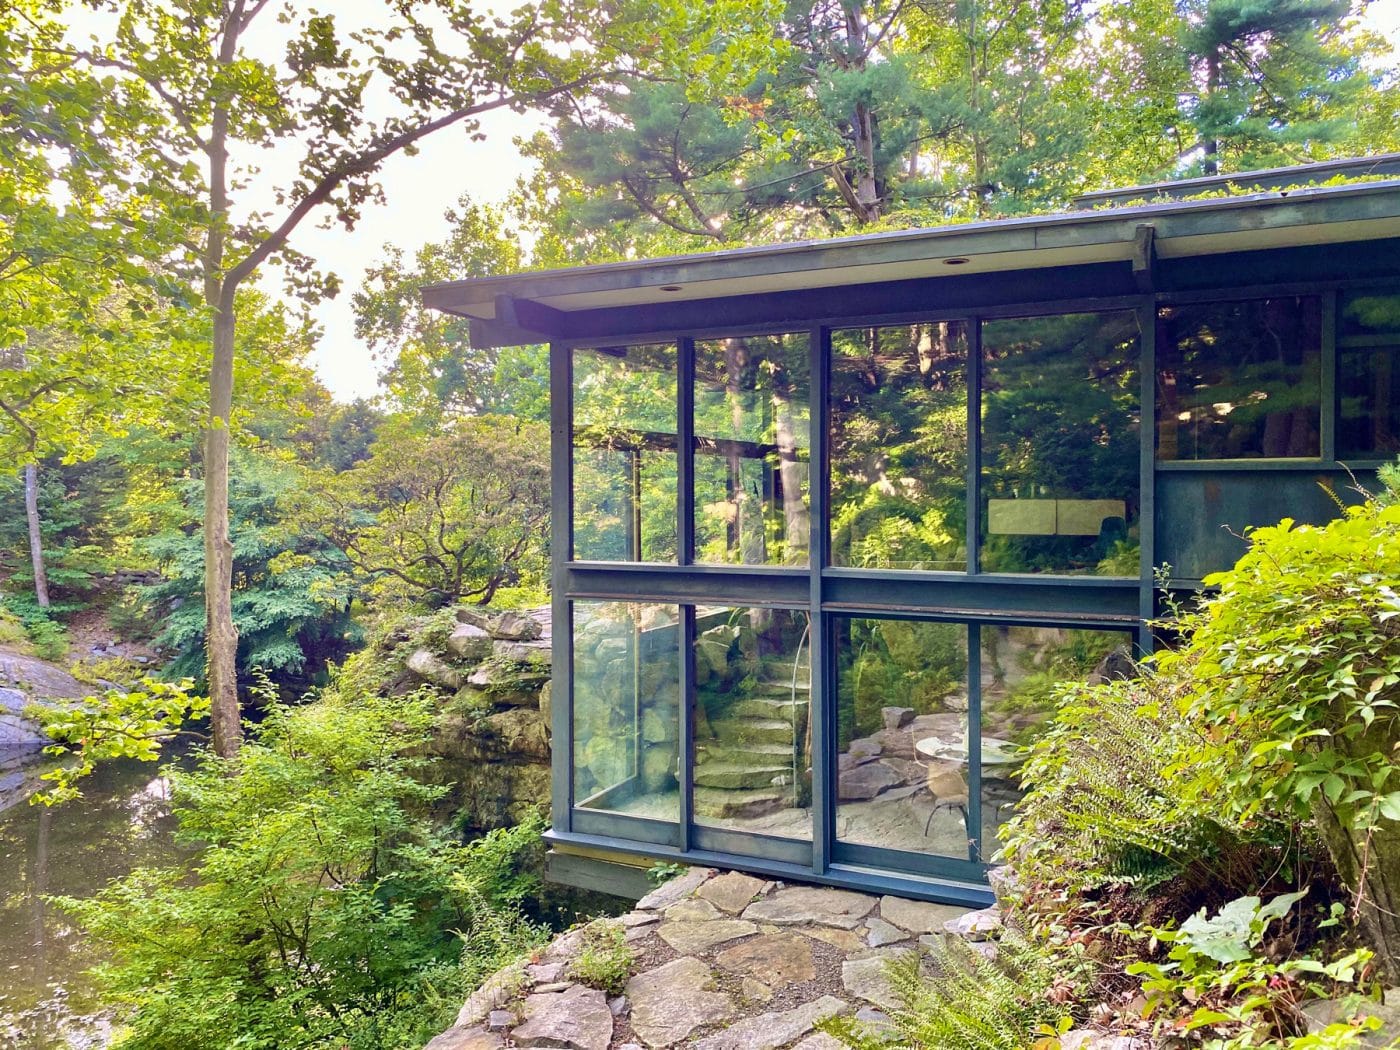 An exterior view of Russel Wright's multilevel, glass-walled house, dubbed Dragon Rock